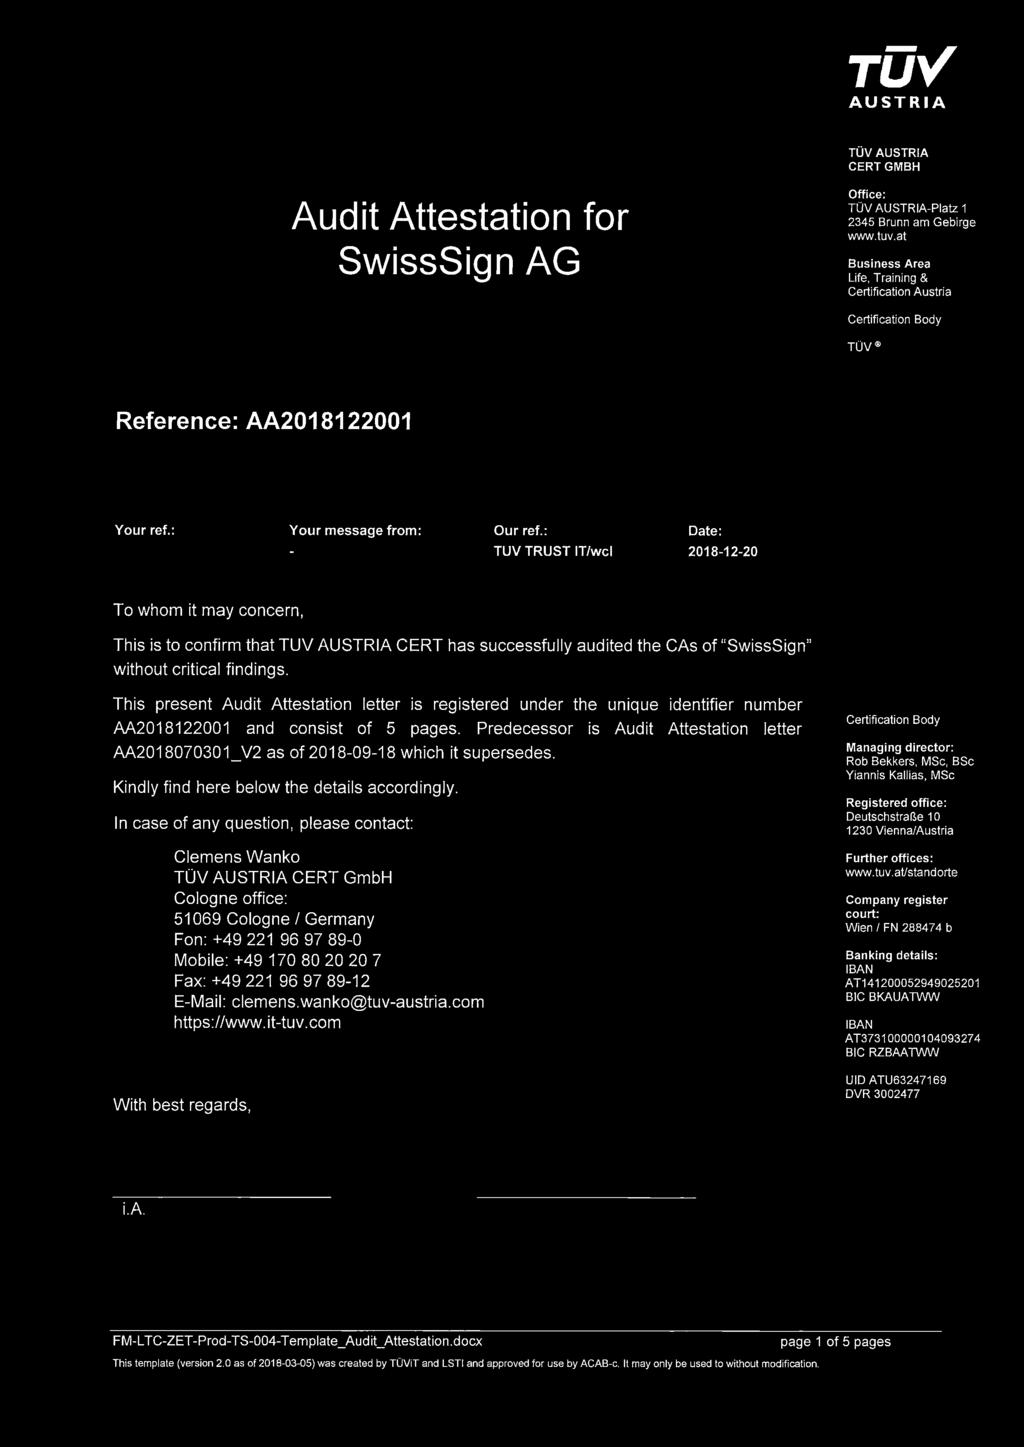 : TUV TRUST IT/wcl Date: 2018-12-20 To whom it may concern, This is to confirm that TUV AUSTRIA CERT has successfully audited the CAs of SwissSign without critical findings.